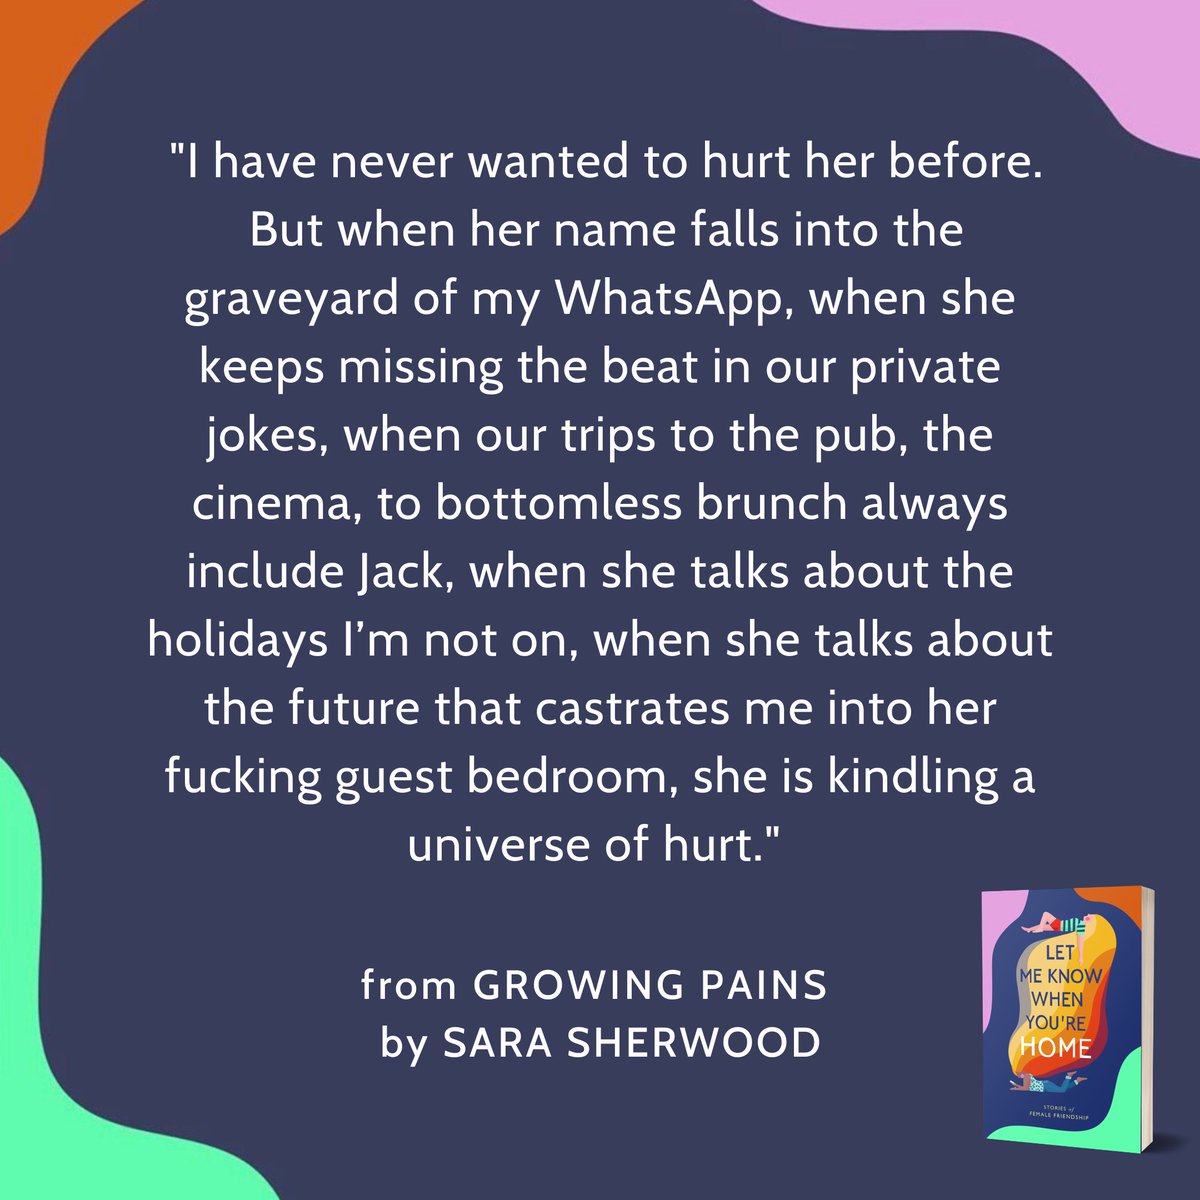 We've shared a gorgeous story by @sarasherwood from our first collection Let Me Know When You're Home – about friendship breakups and changing relationships. Read it here: deardamsels.com/2023/05/22/lmk…